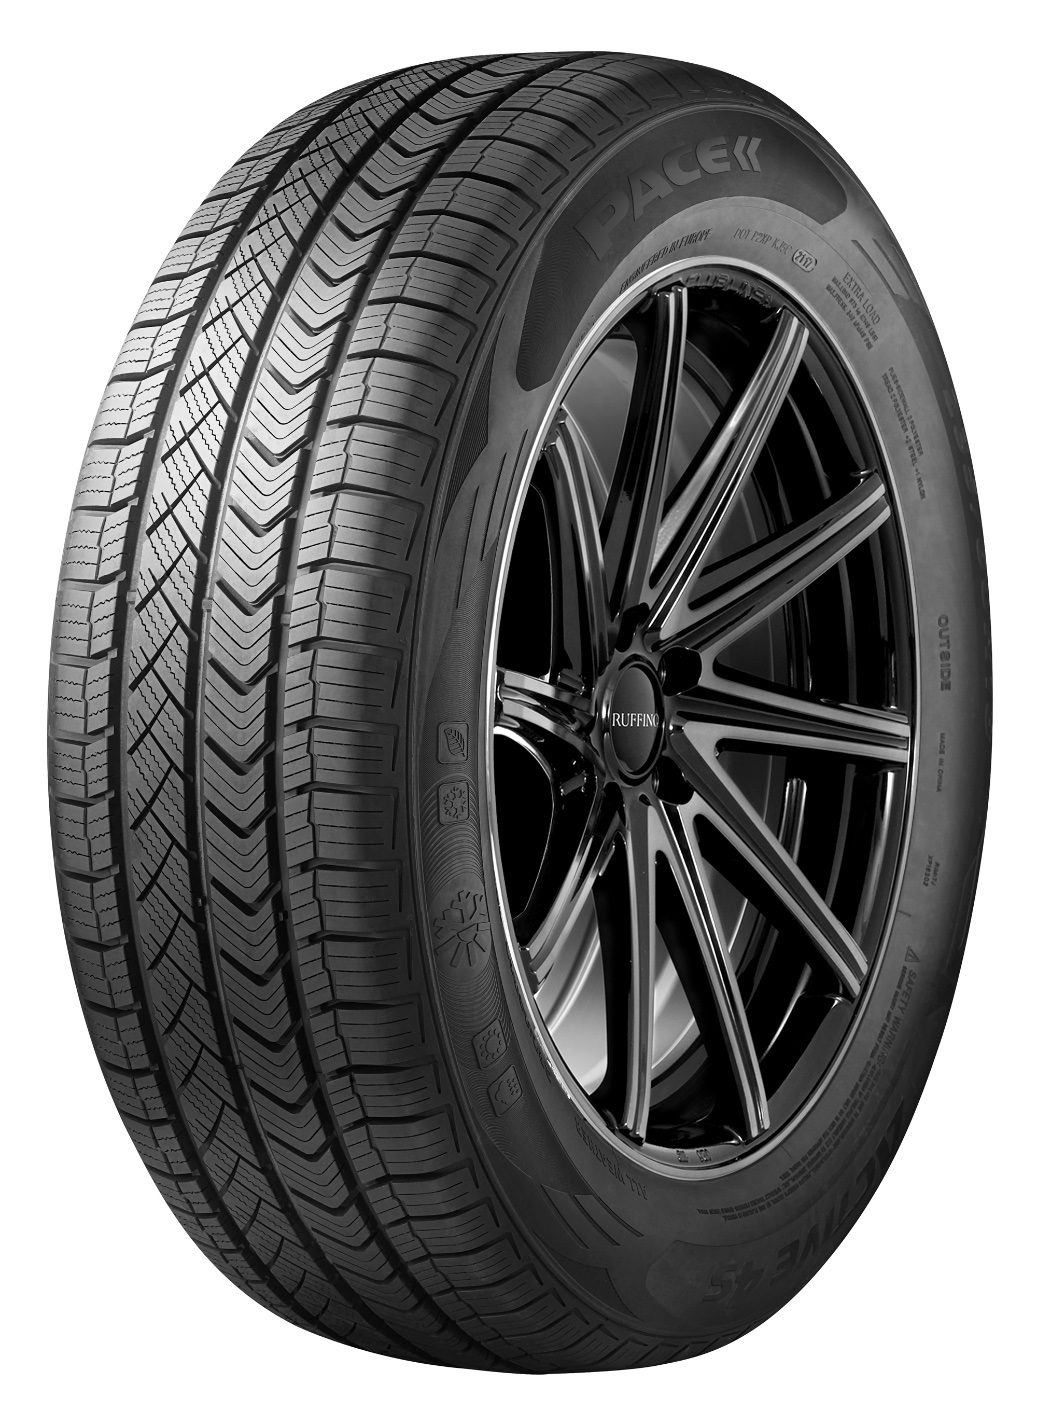 Gomme Nuove Pace 195/65 R15 91H ACTIVE 4S M+S pneumatici nuovi All Season